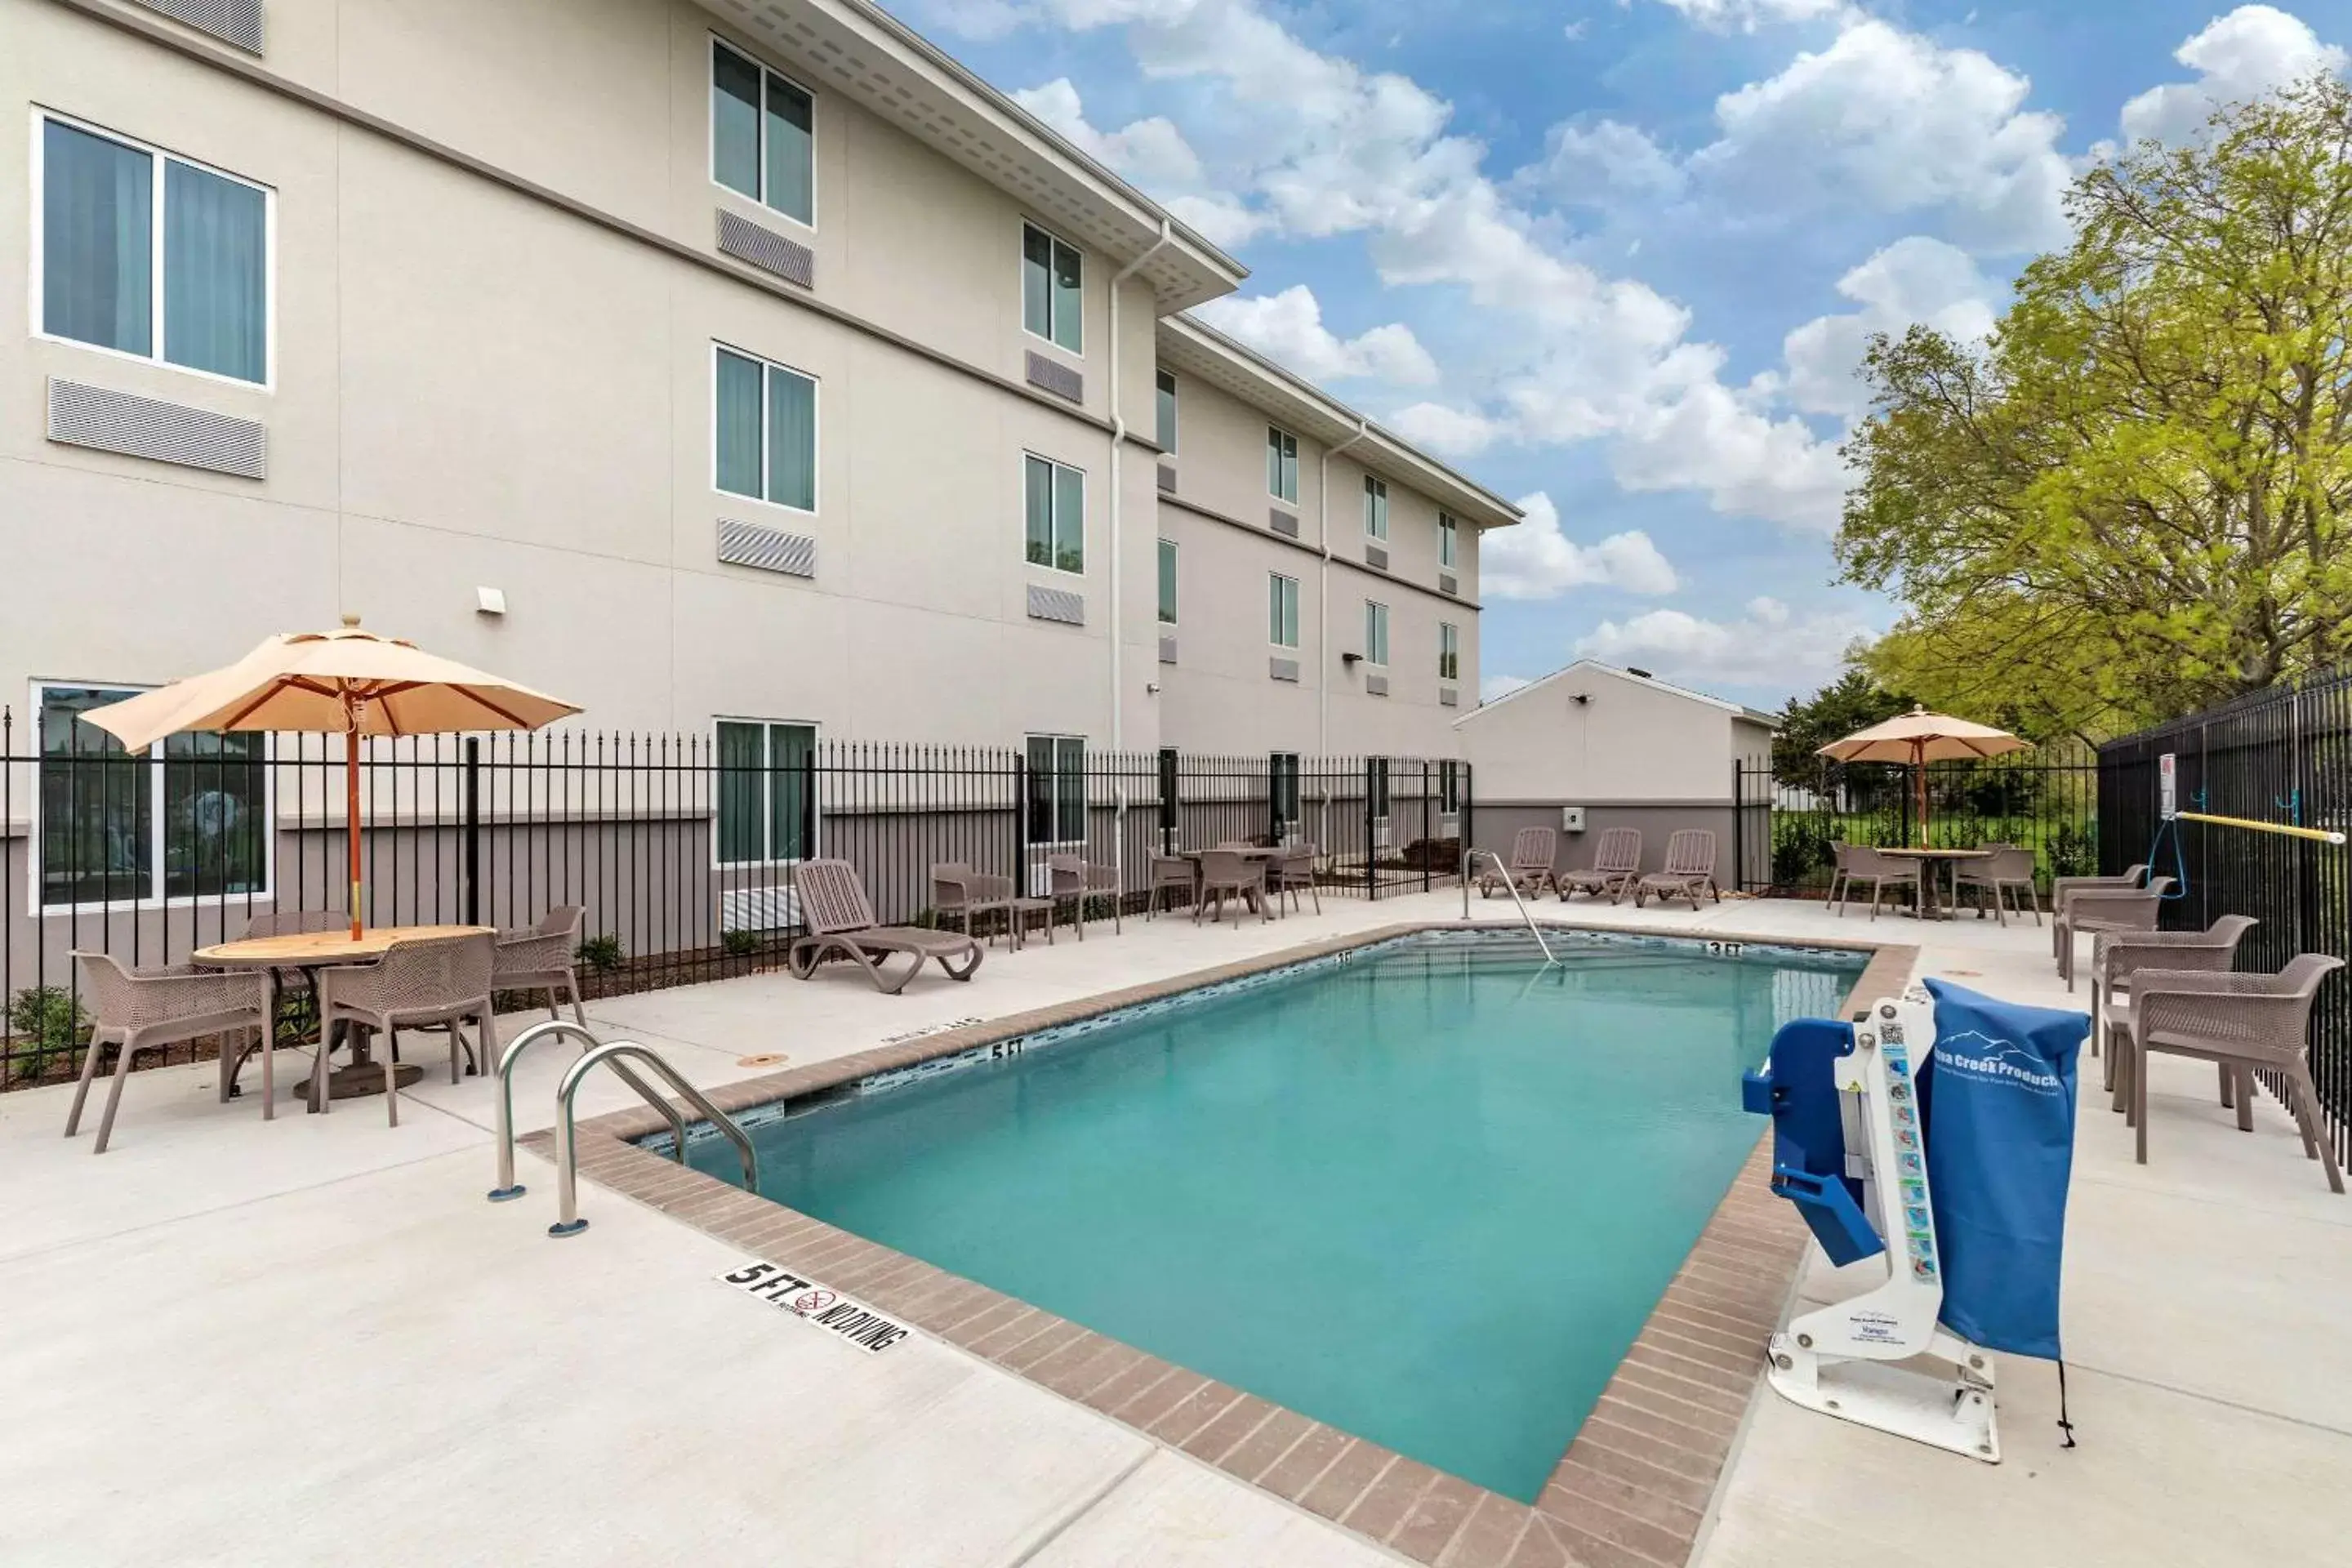 On site, Swimming Pool in MainStay Suites Lancaster Dallas South